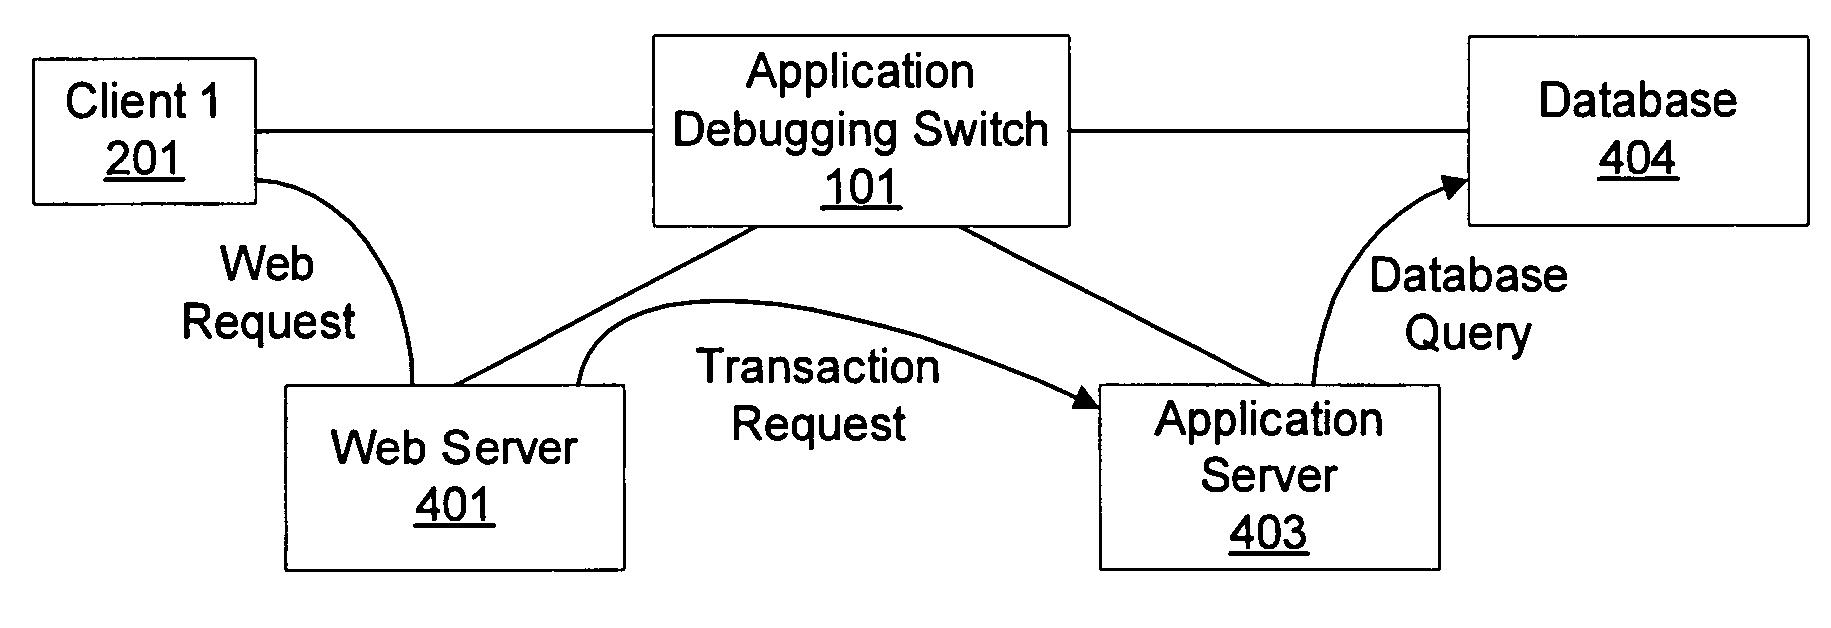 Debugging application performance over a network